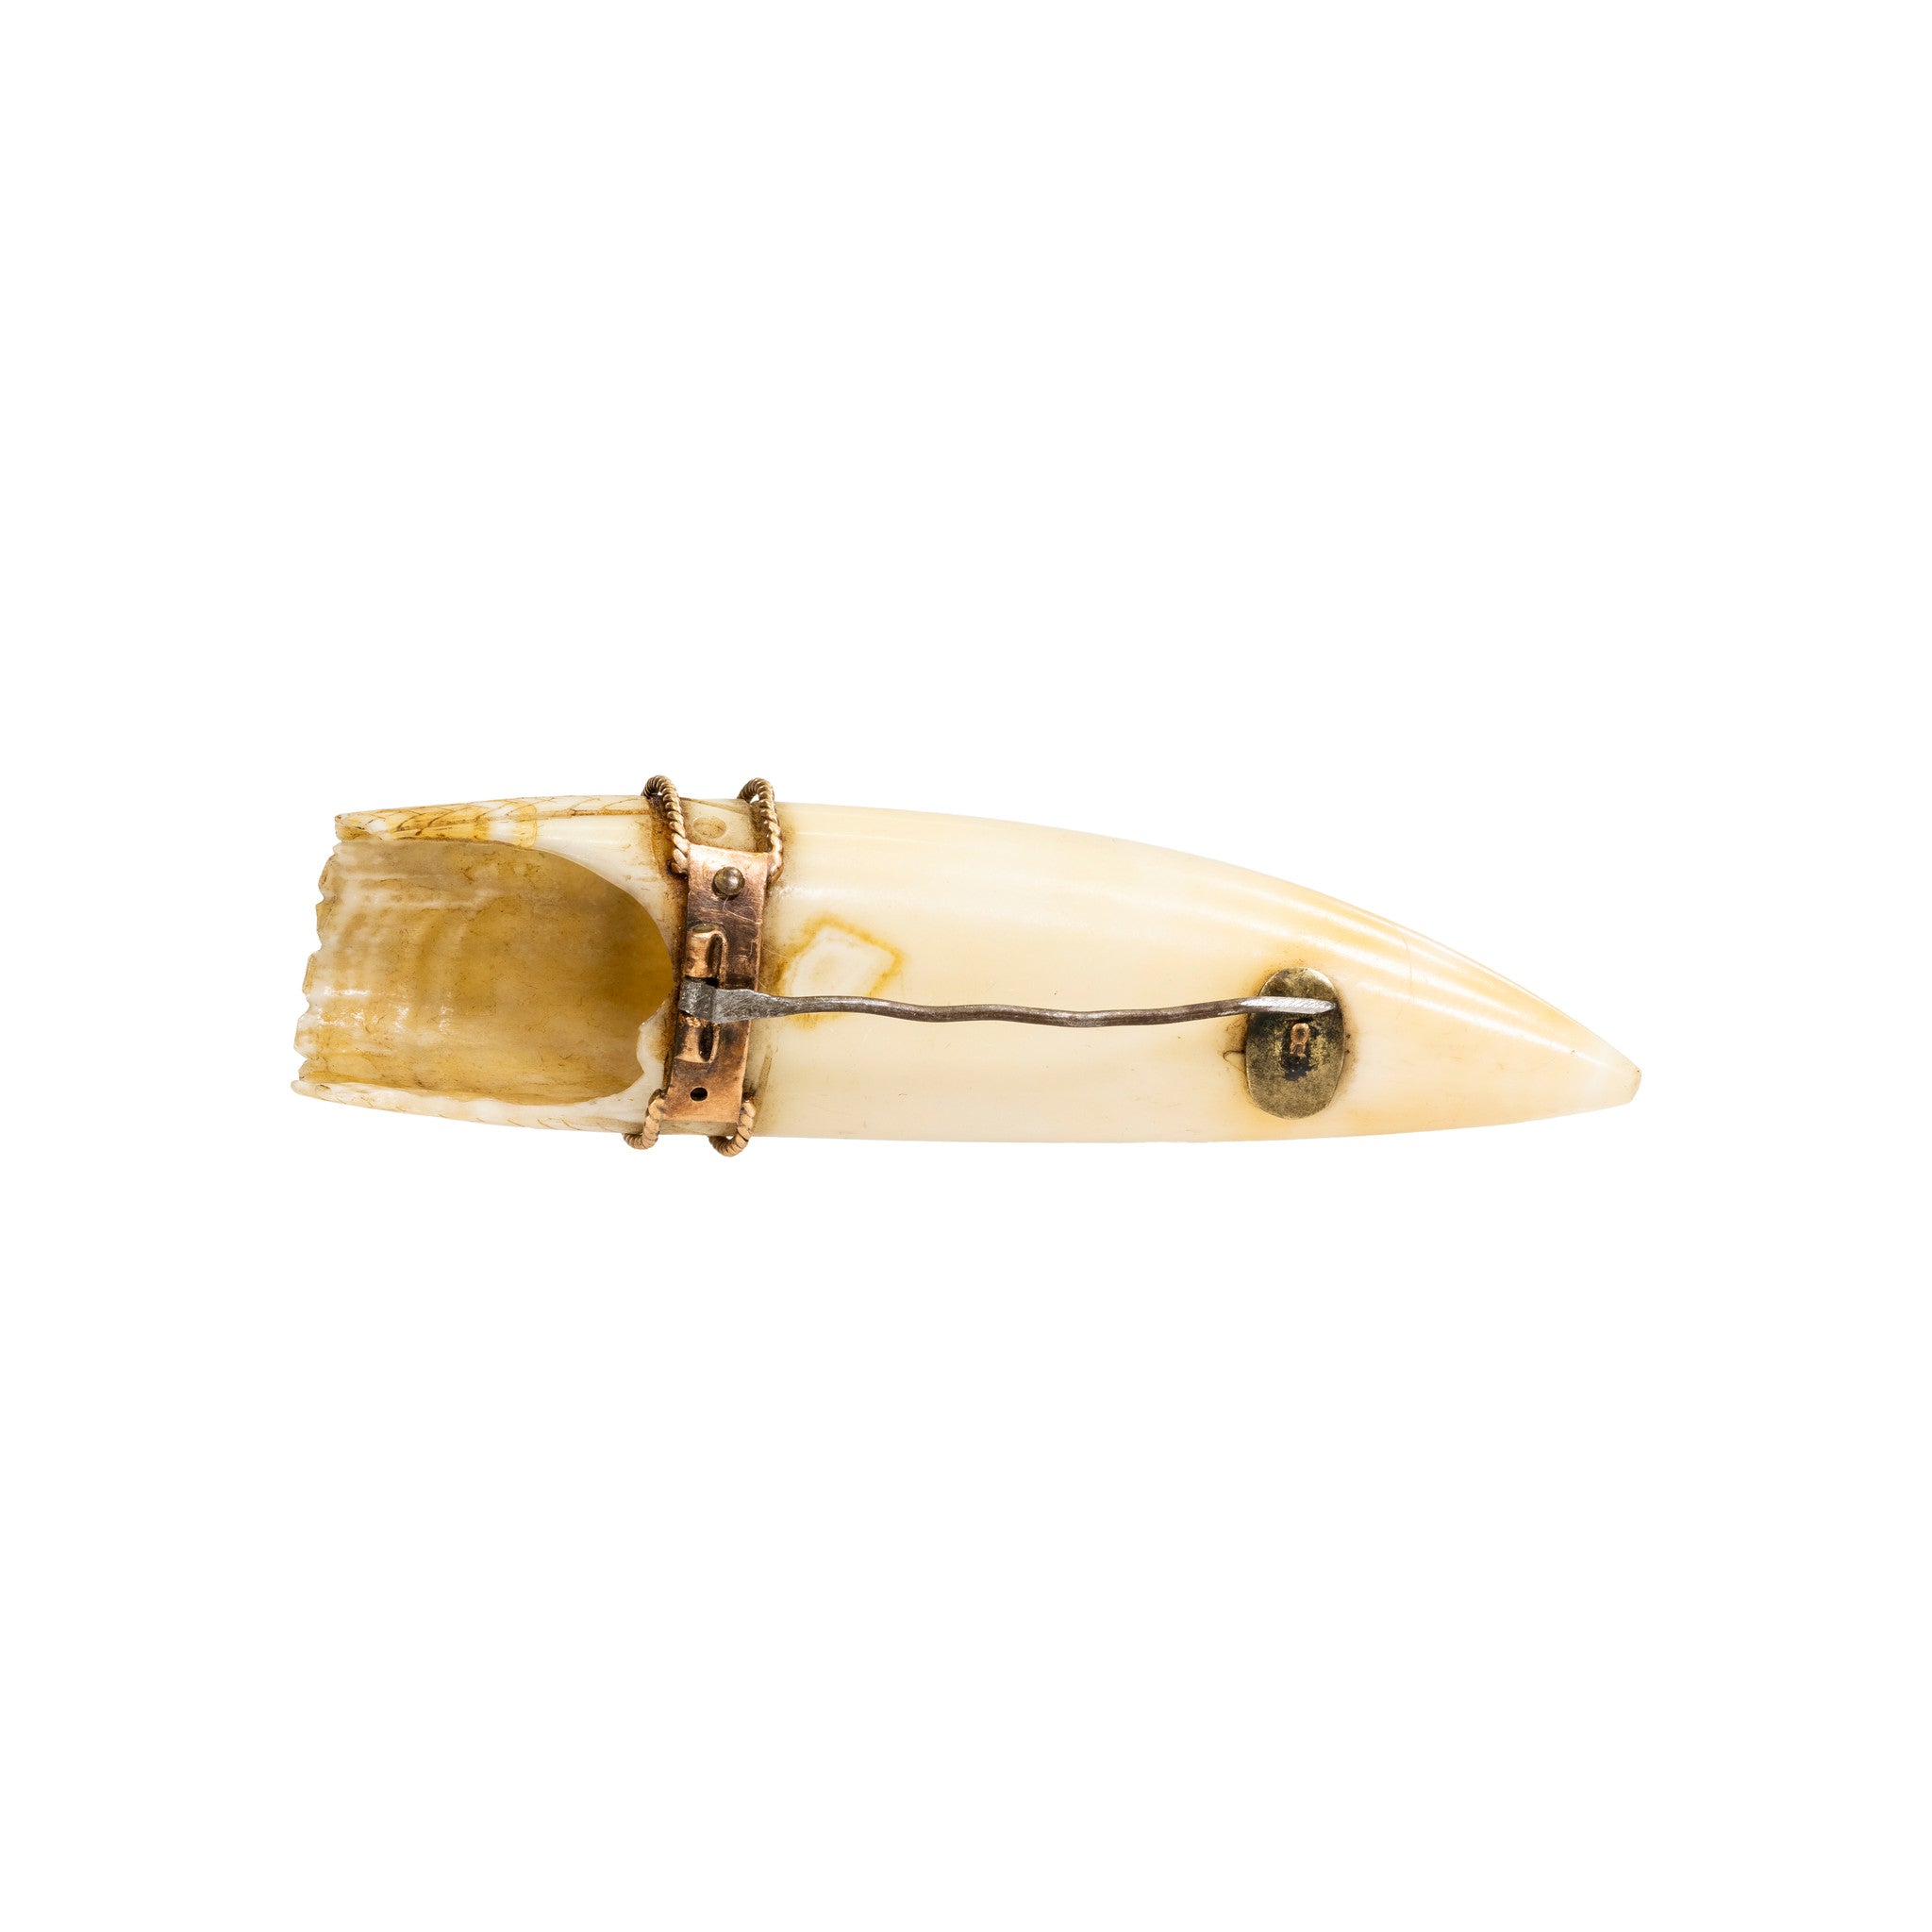 Sperm Whale Tooth Brooch